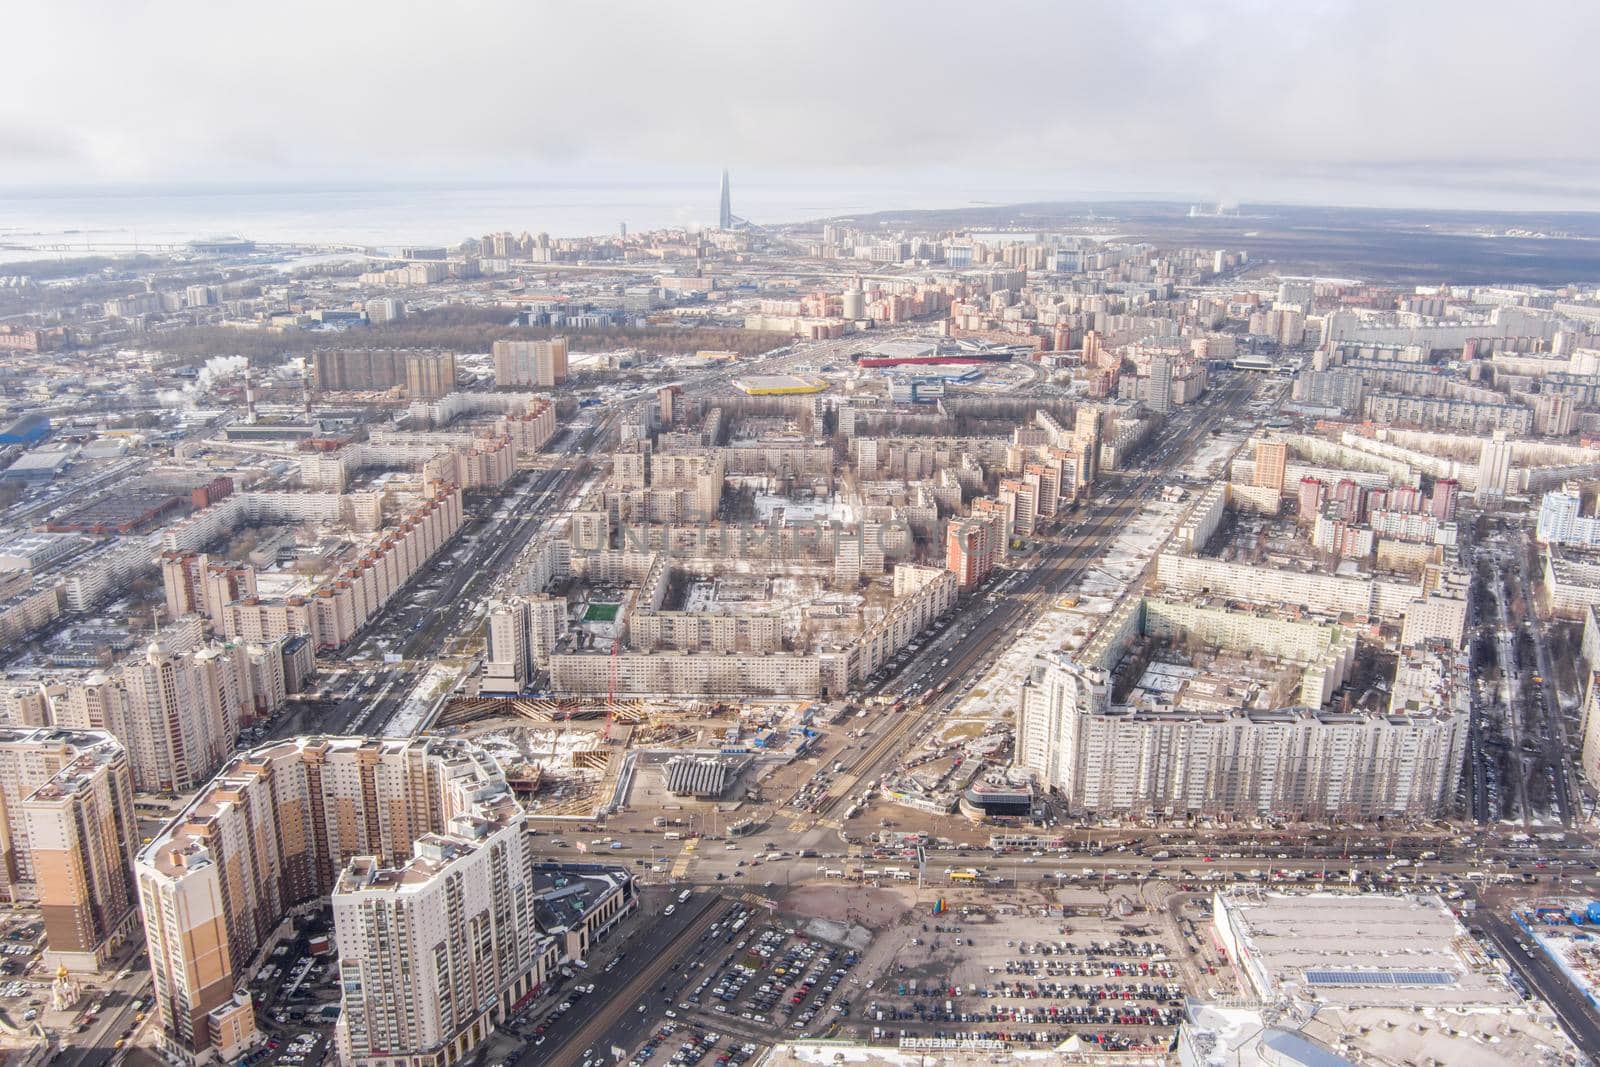 Russia, St.Petersburg, 03 March 2021: The Aerial view of the huge crossroad at metro station Pioneerskaya, Ispytateley Avenue and Kolomyazhsky, huge houses, developing shopping center. High quality image